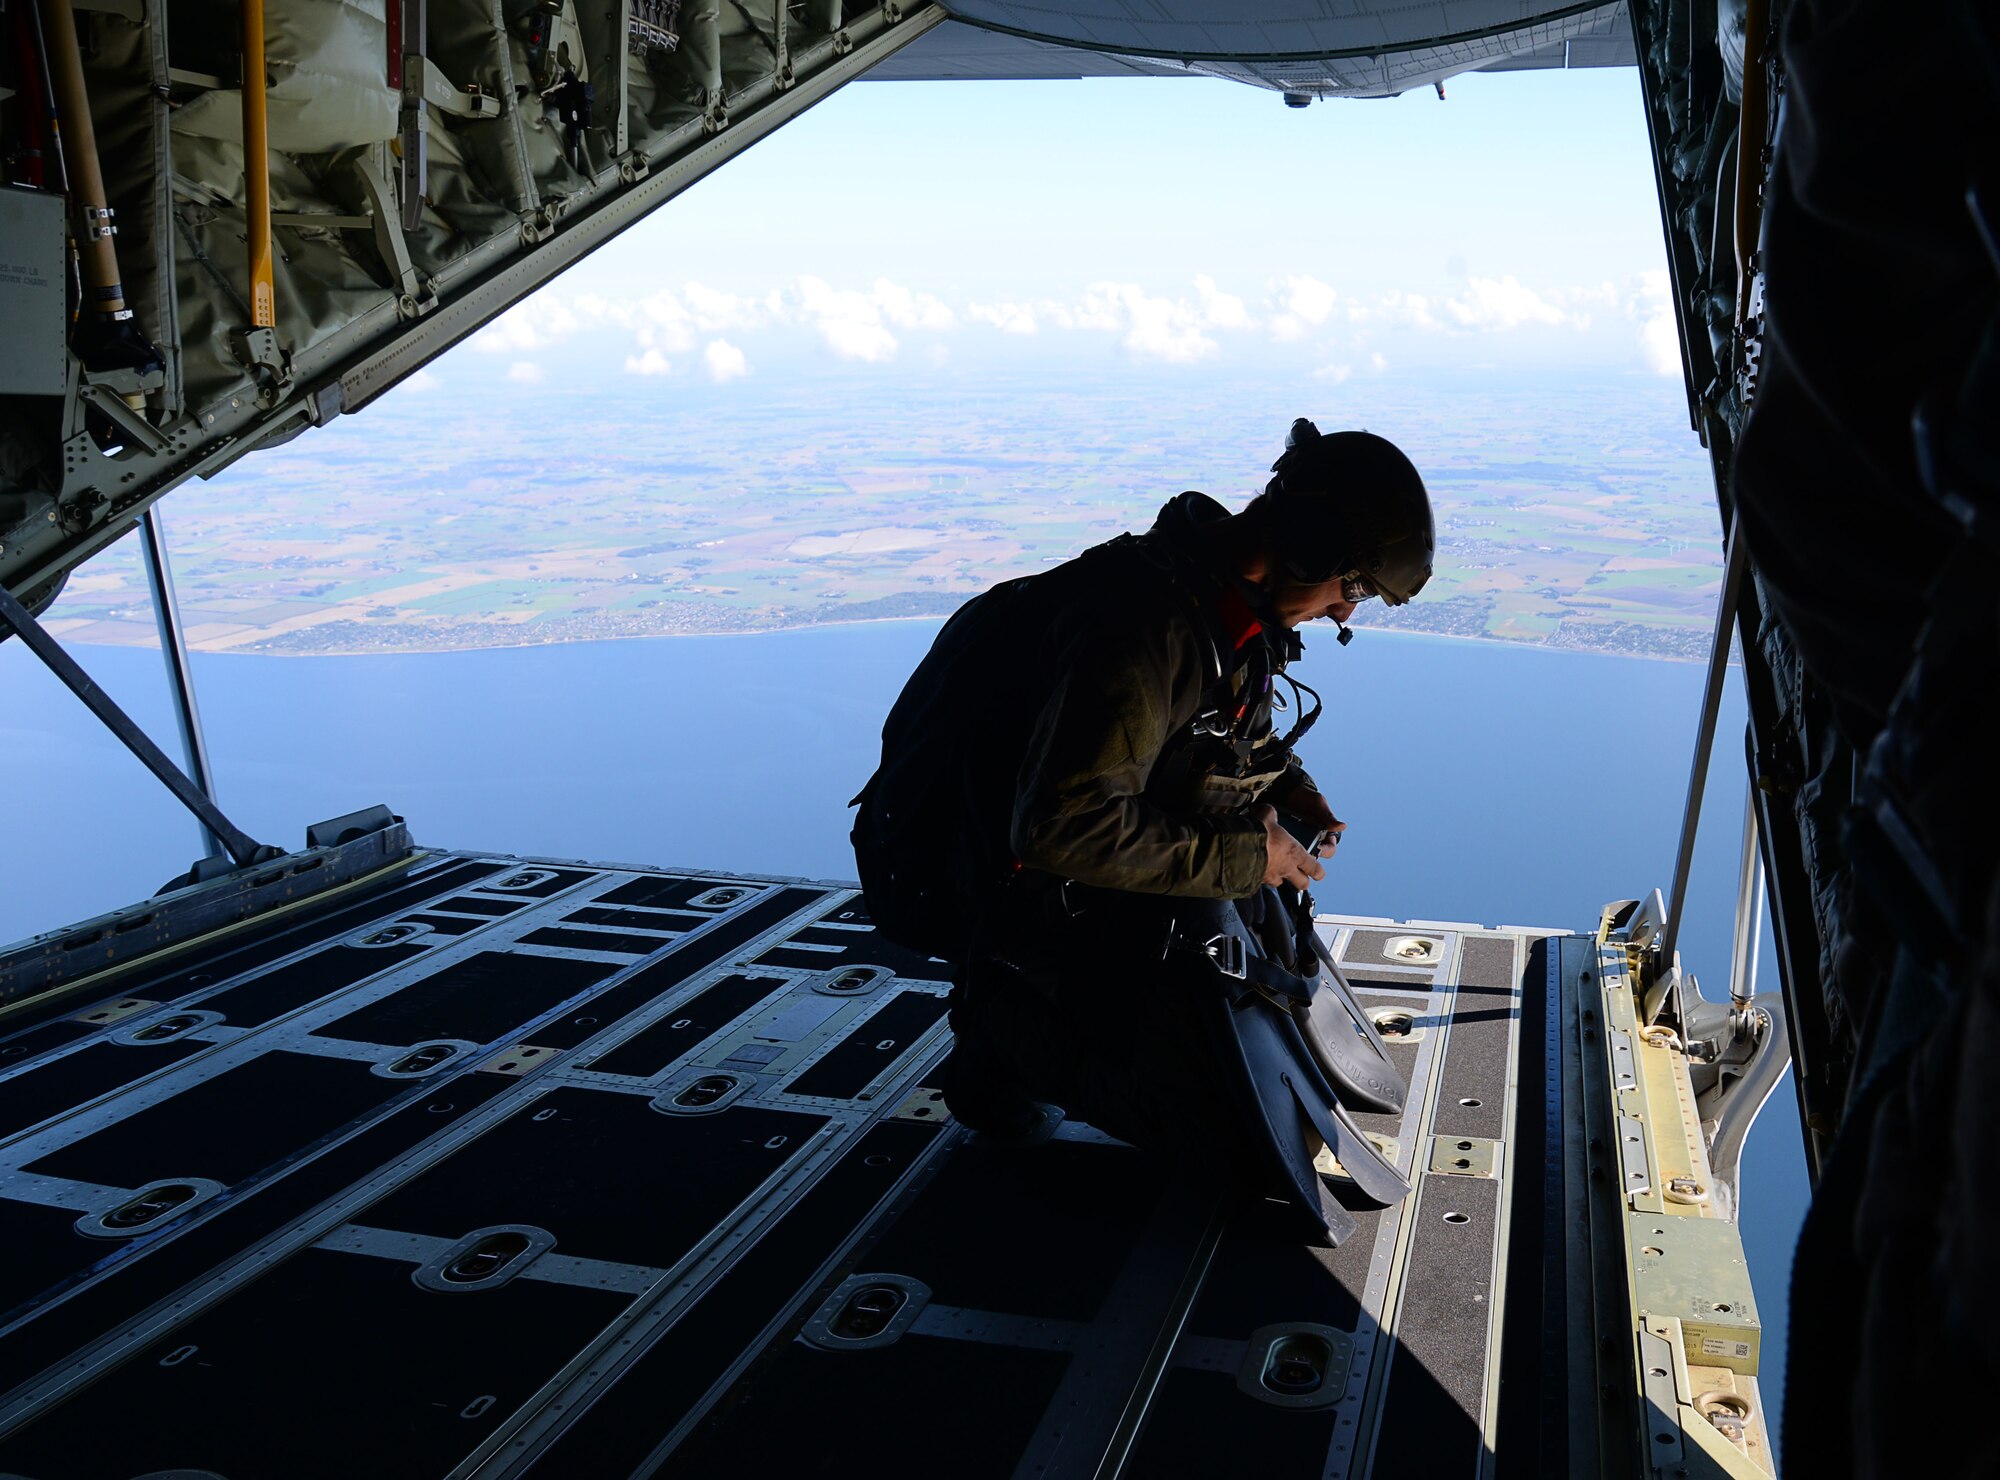 A U.S. Air Force Air Commando assigned to the 352nd Special Operations Wing makes final jump assessments before conducting a free fall from an MC-130J Commando II assigned to the 67th Special Operations Squadron, over the Little Belt Strait in Denmark Sept. 27, 2016. Airmen from RAF Mildenhall, England and U.S. Navy Special Warfare Combatant-Craft crewmen worked with ally forces during the 2016 Night Hawk exercise testing joint force capabilities. (U.S. Air Force photo by Senior Airman Justine Rho) 